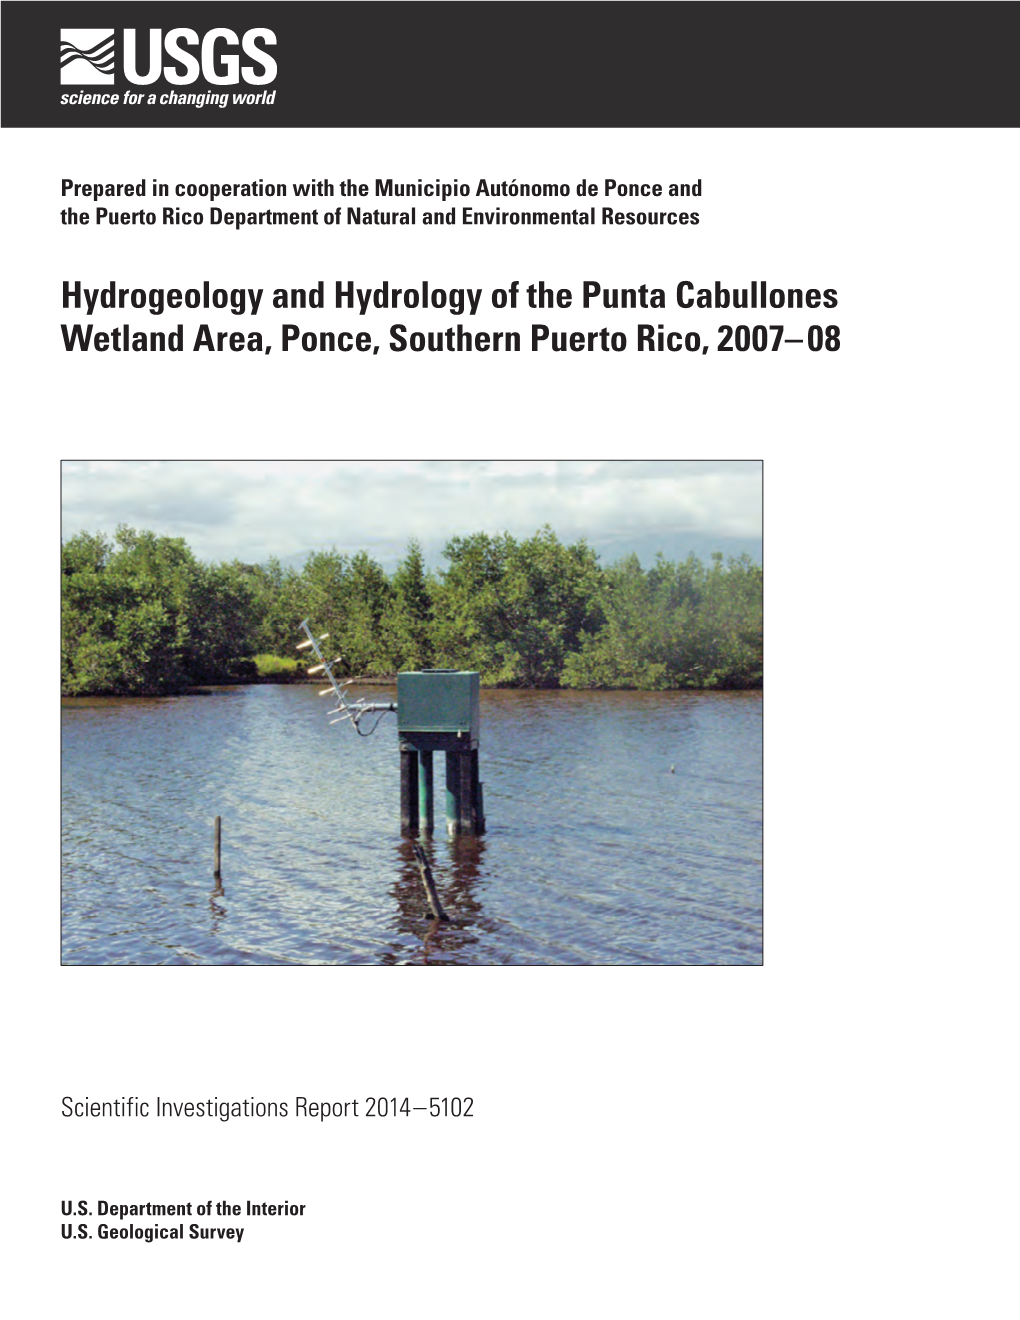 Hydrogeology and Hydrology of the Punta Cabullones Wetland Area, Ponce, Southern Puerto Rico, 2007– 08